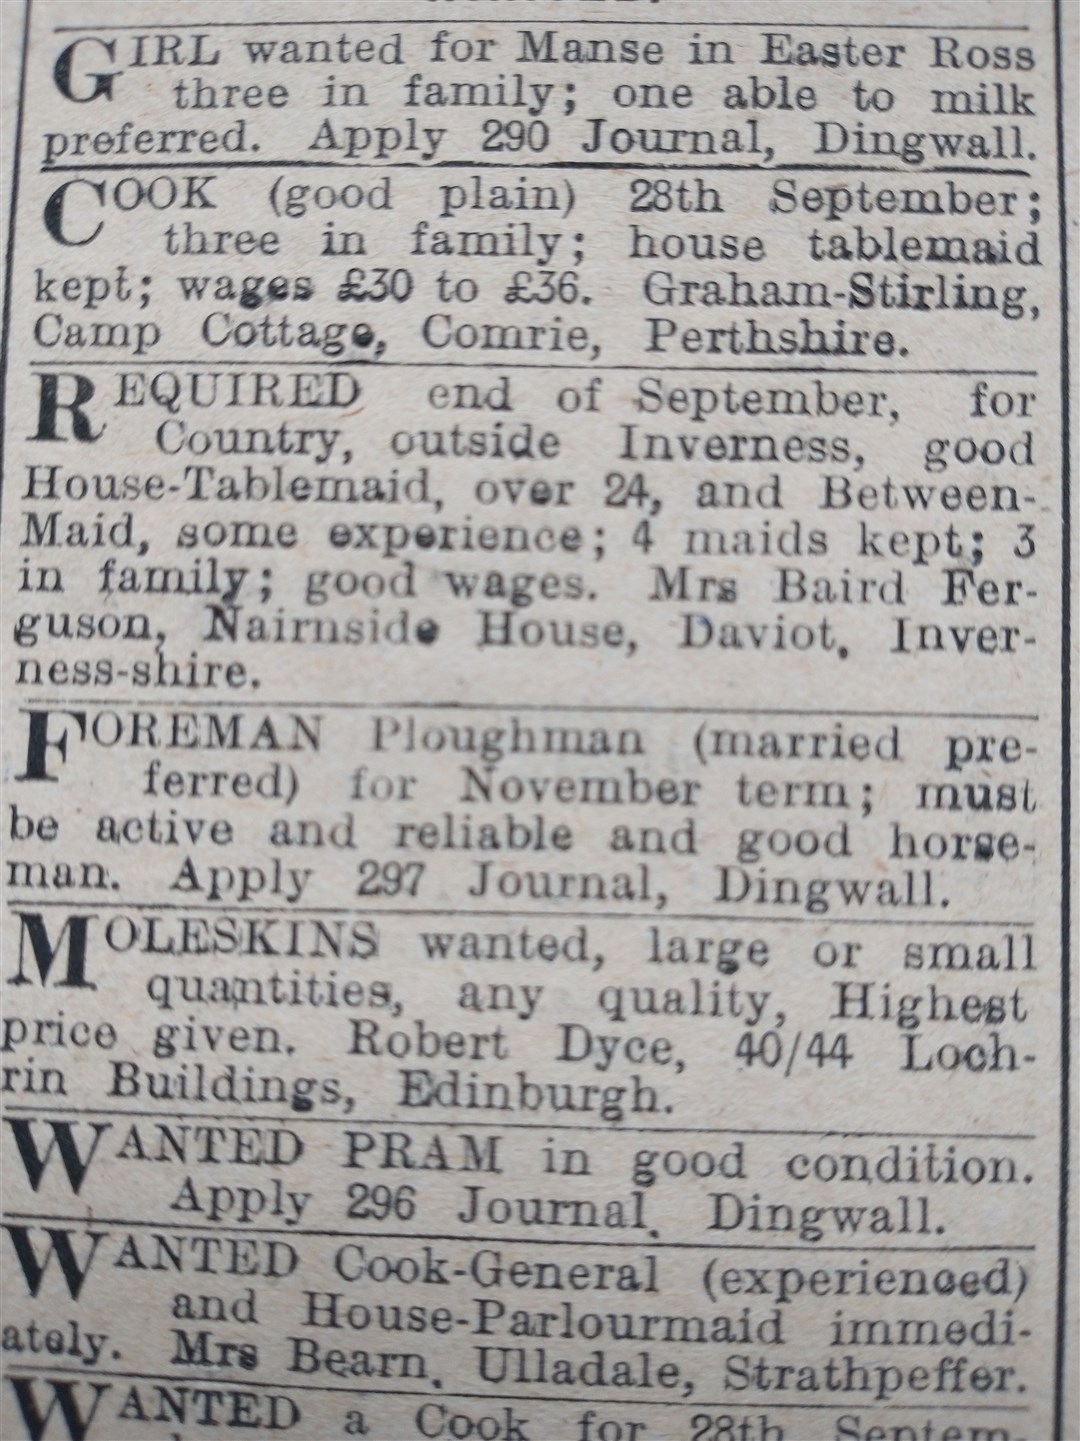 Some of the jobs in progress 100 years ago, as advertised on the front page of the Ross-shire Journal.